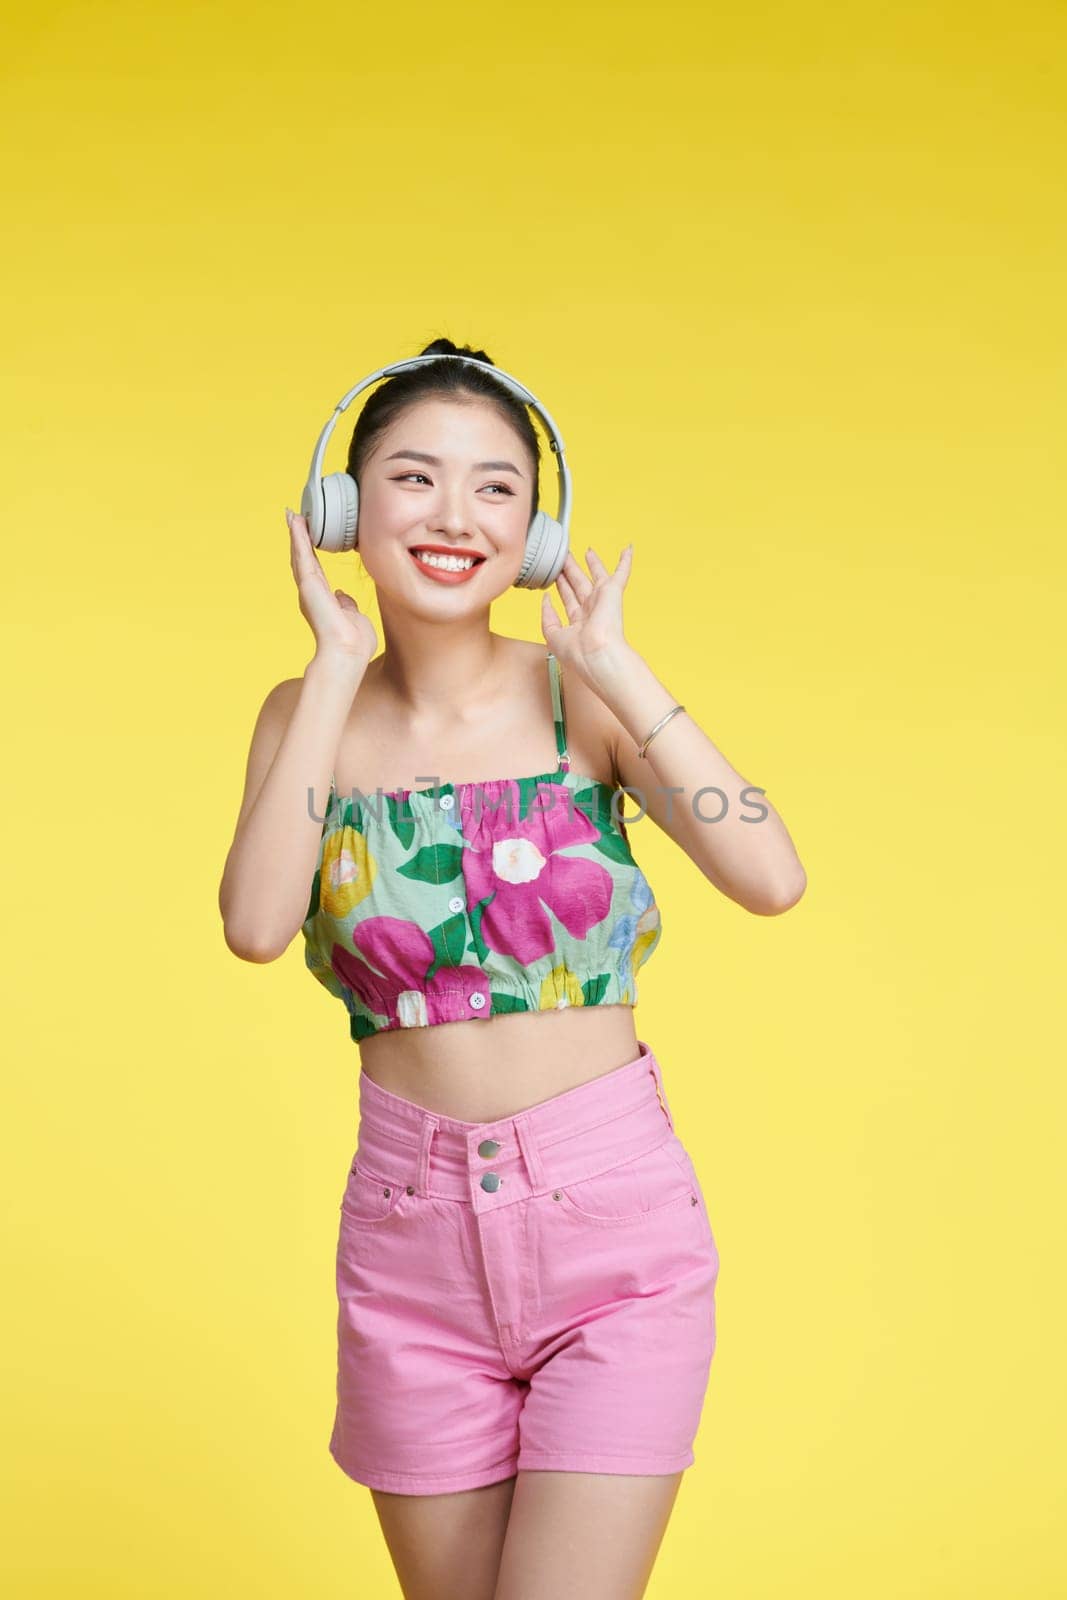 Cheerful young woman listen to music putting her hands on headphones isolated on yellow background